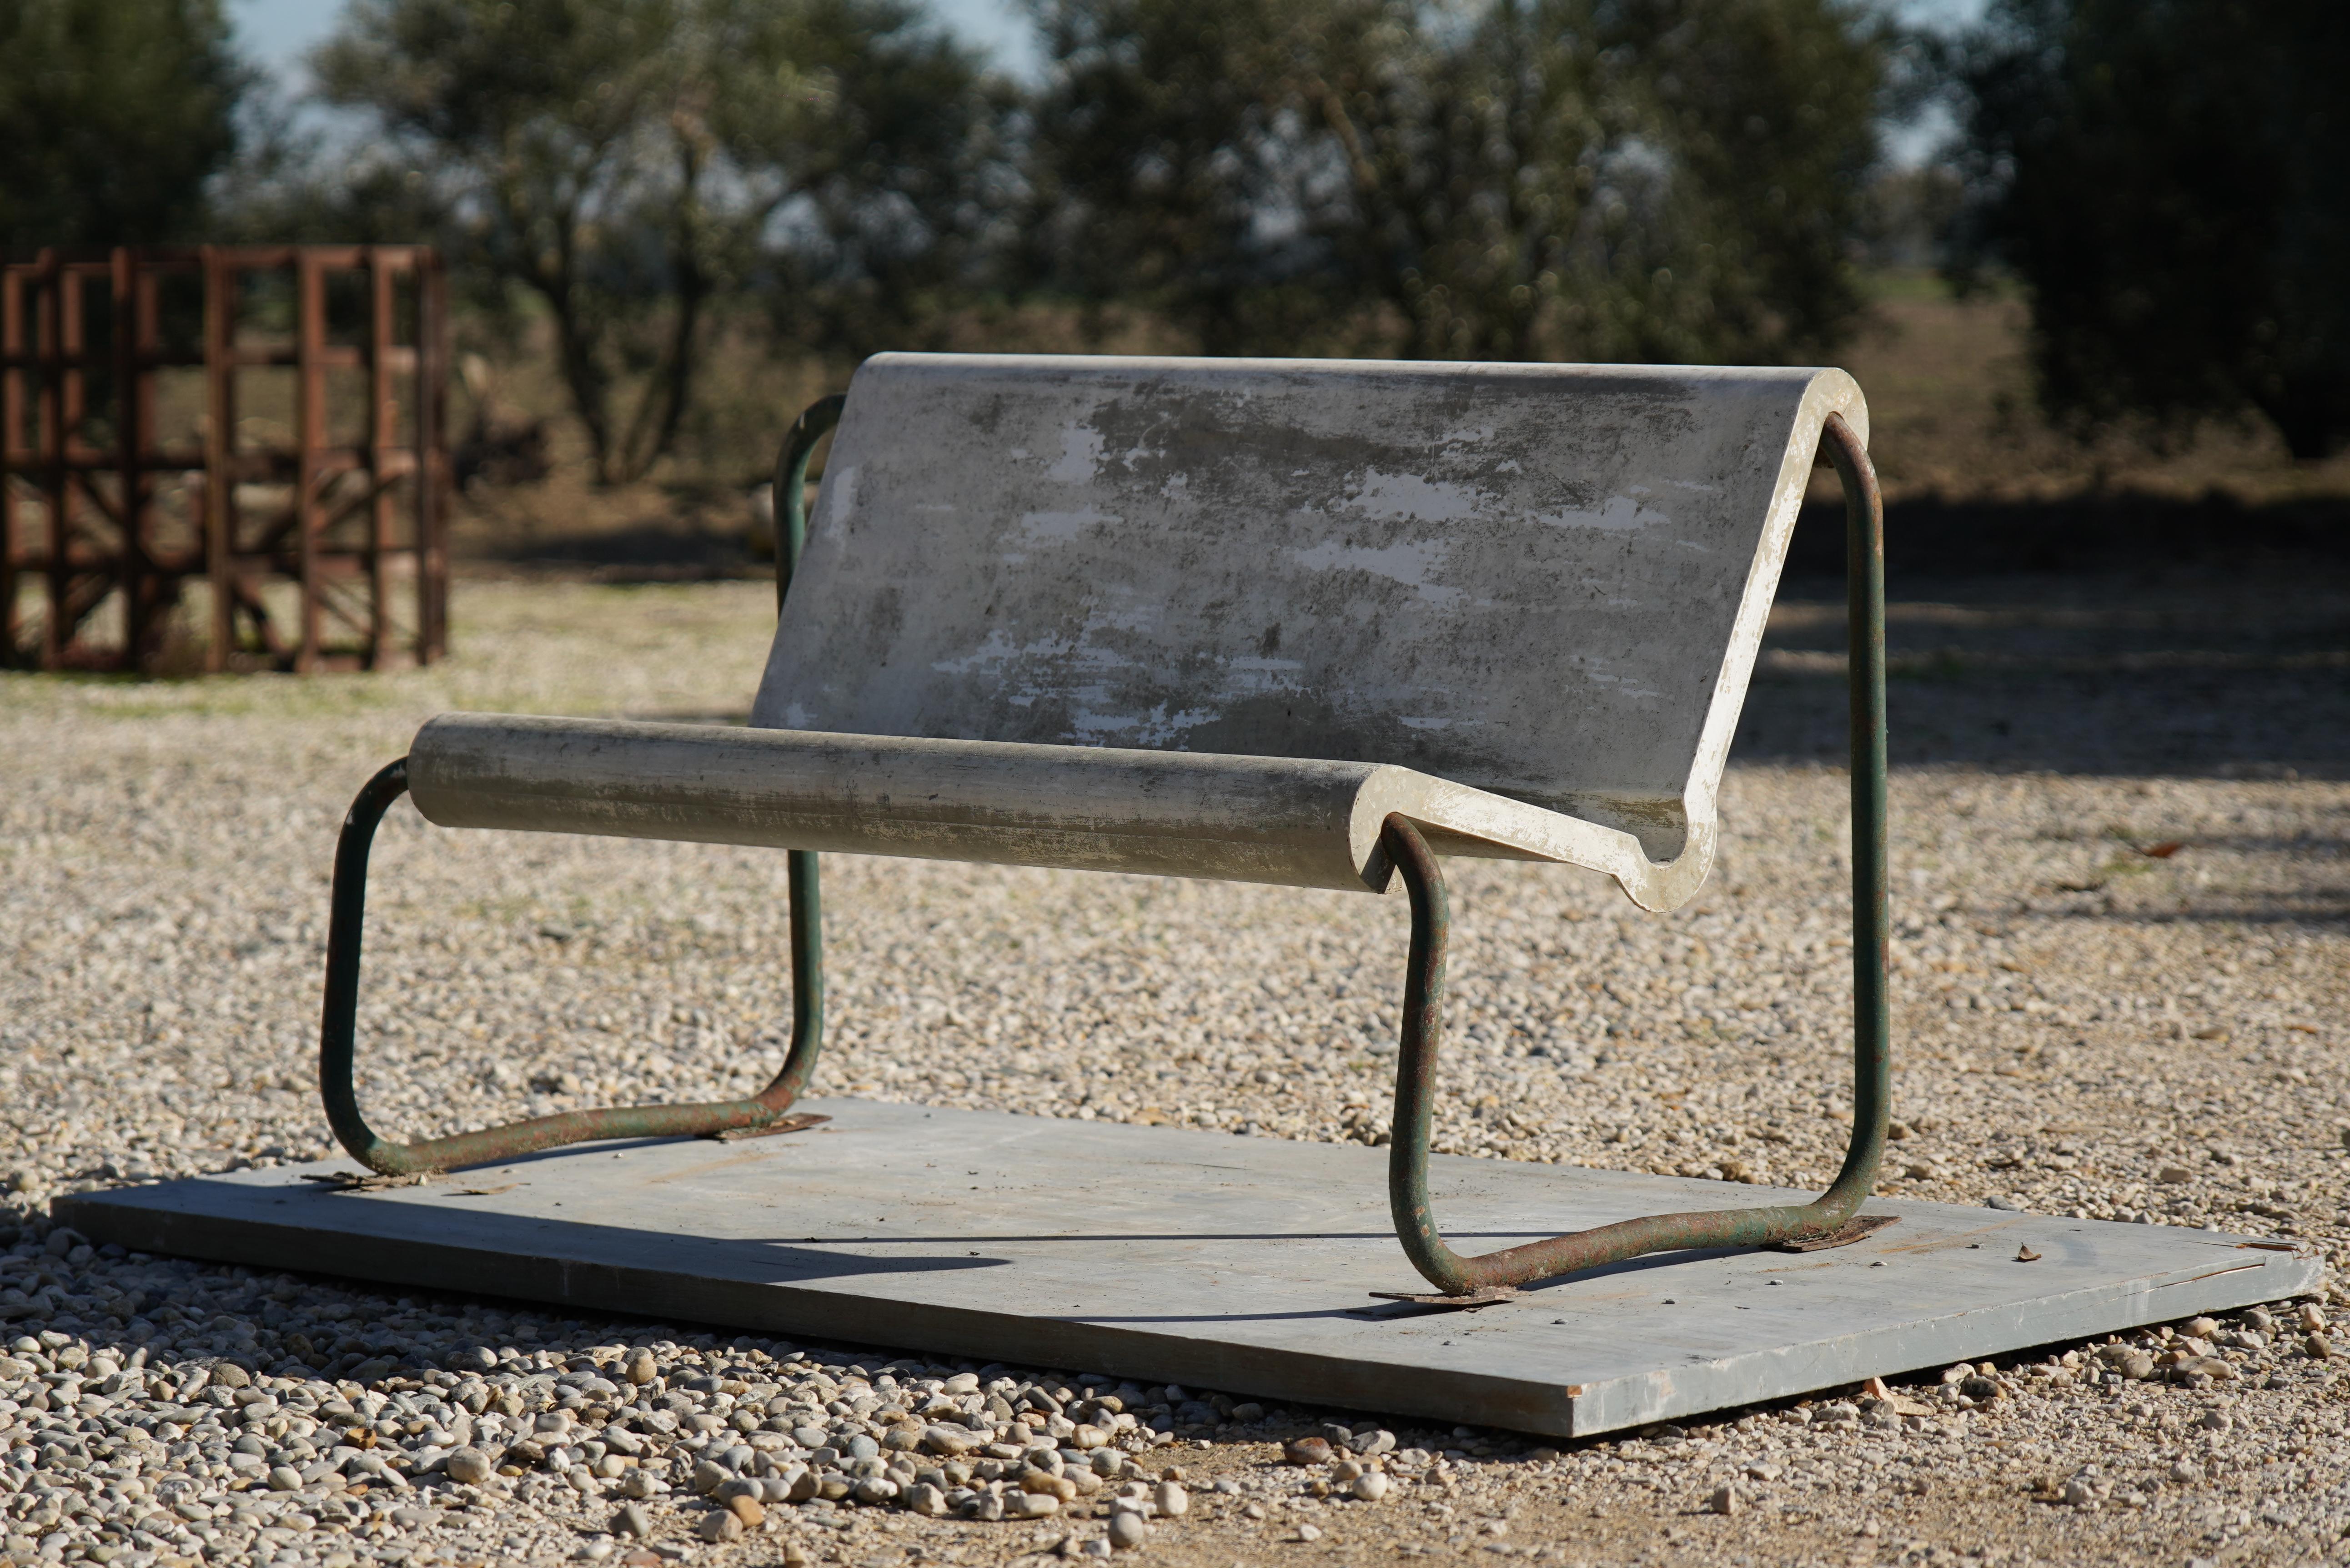 Stunning floating bench designed by Swiss Architect Willy Guhl for Eternit, Switzerland, circa 1960. Made of reinforced fiberglass and steel tubular frame. Incredible patina to both seat and frame which are both in original, untouched condition.